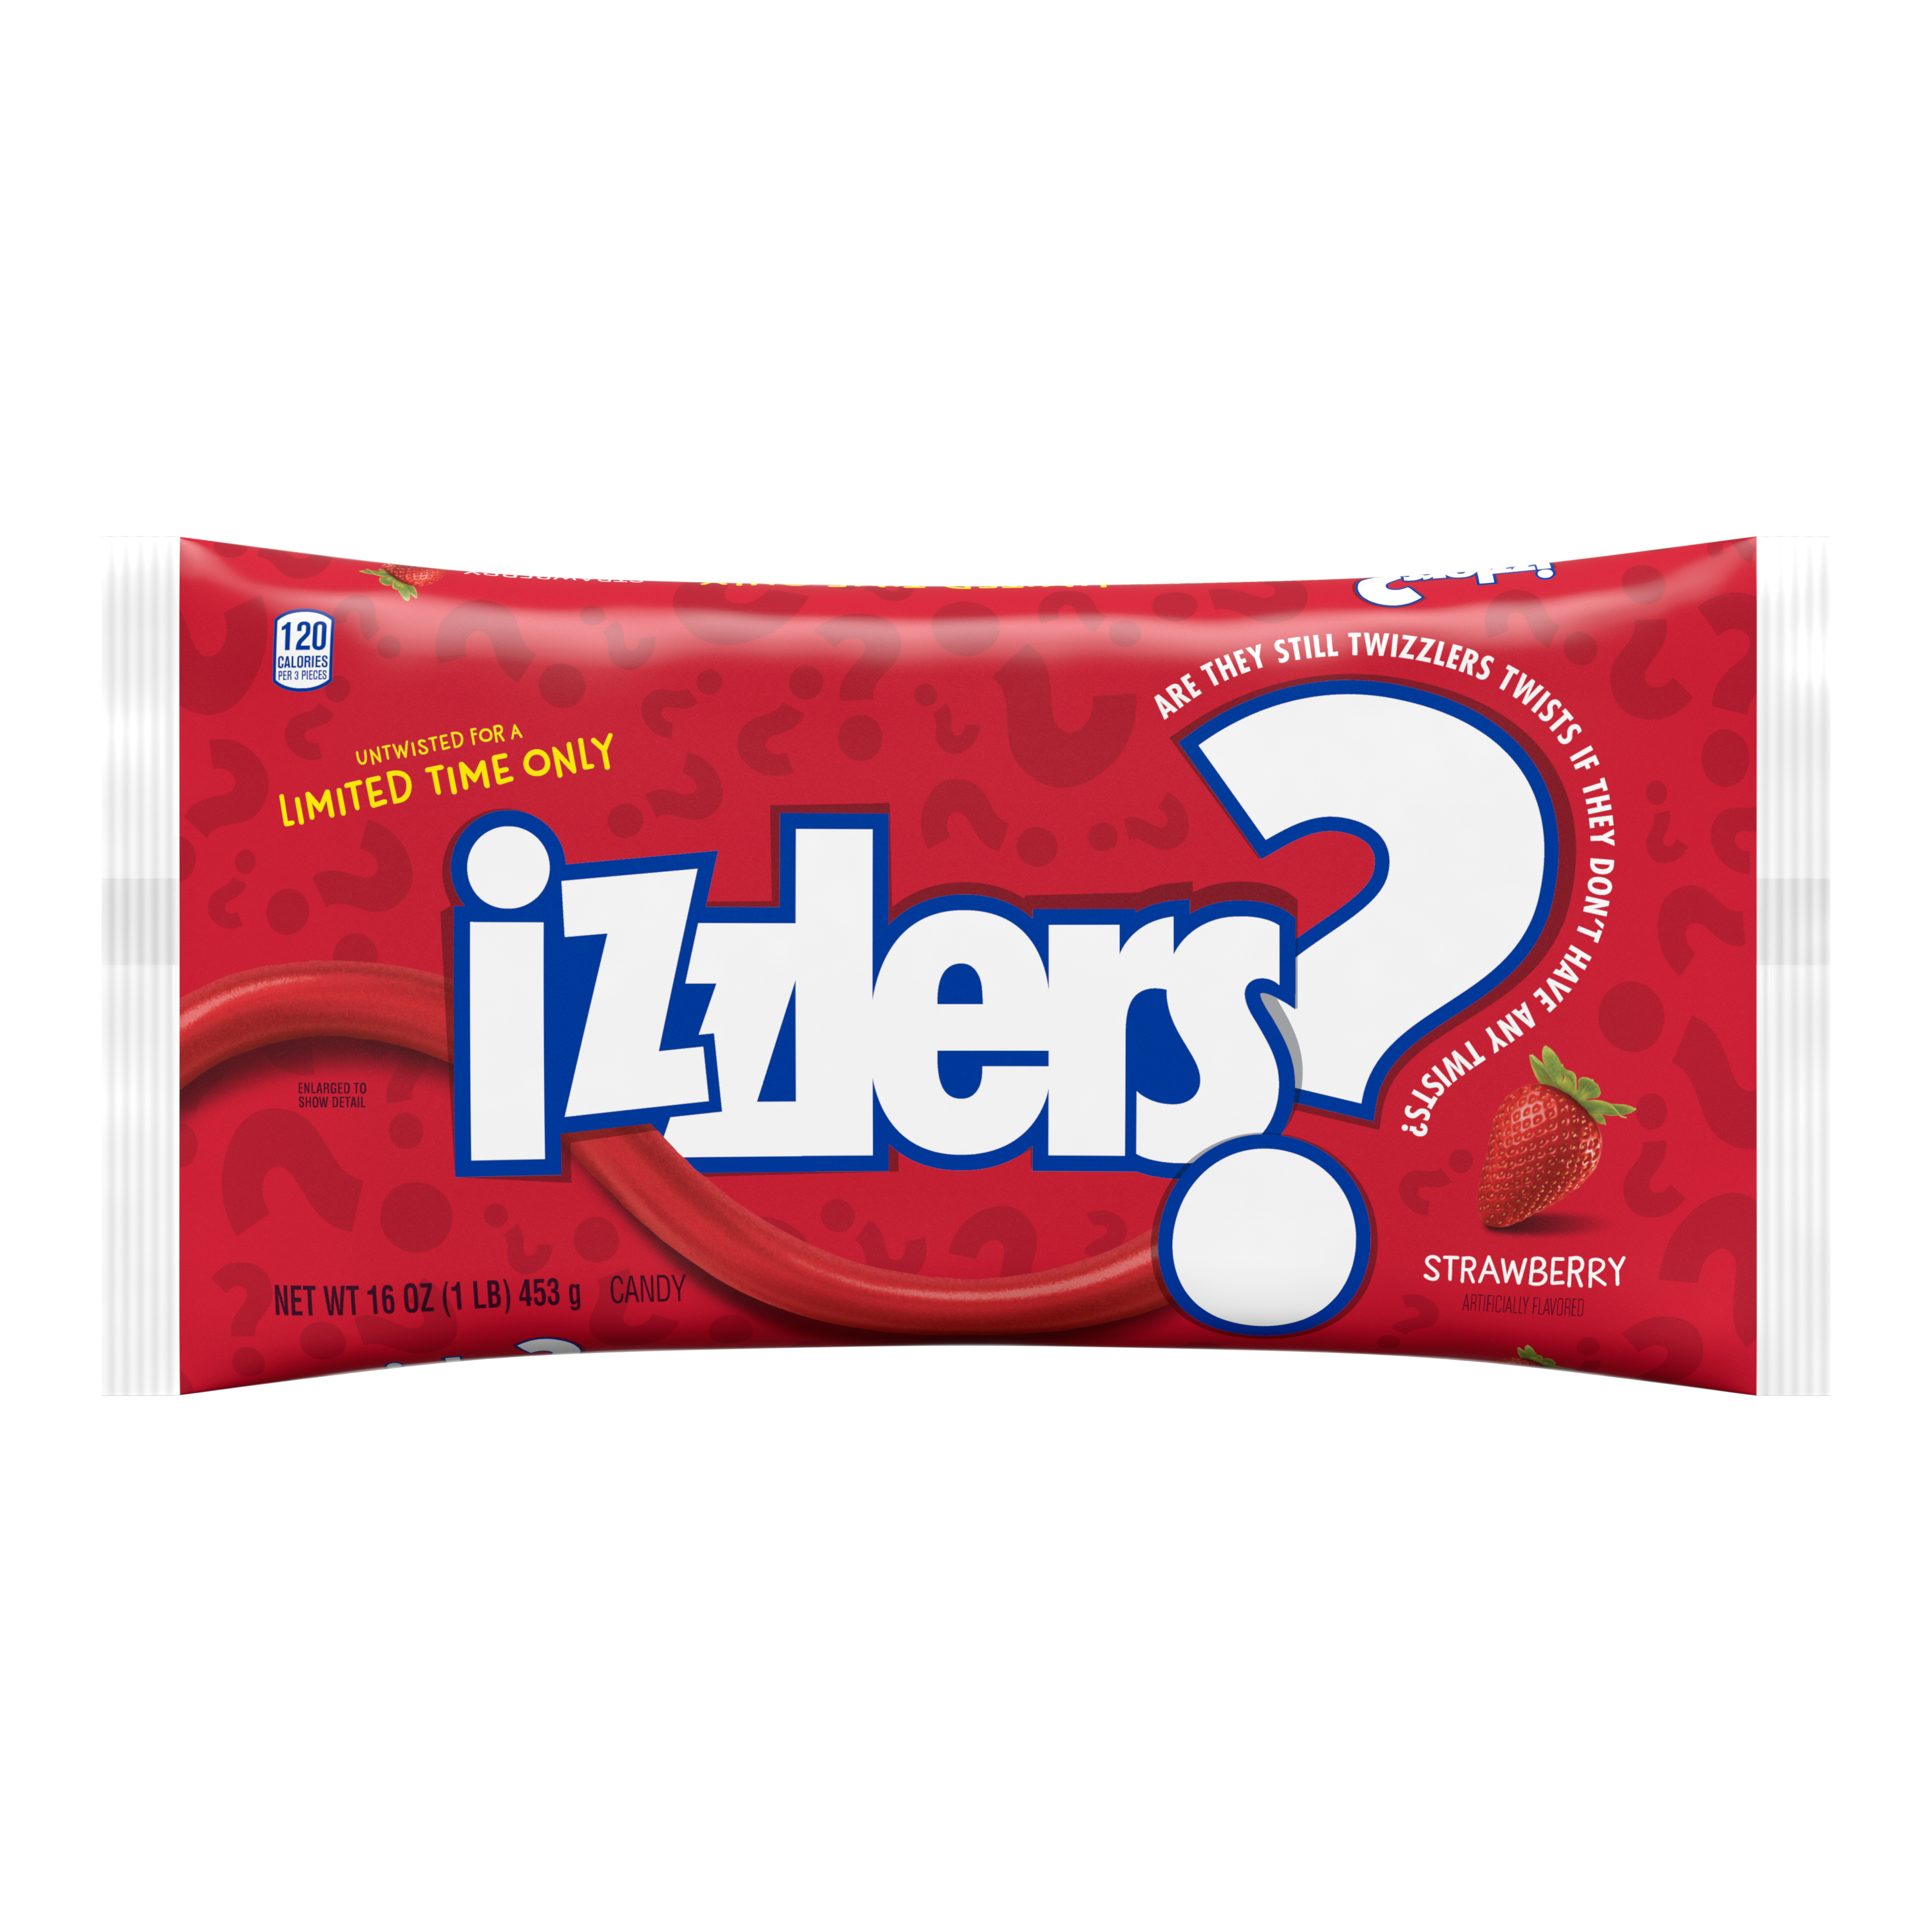 TWIZZLERS iZZLERS Untwisted Strawberry Flavored Candy, 16 oz bag - Front of Package